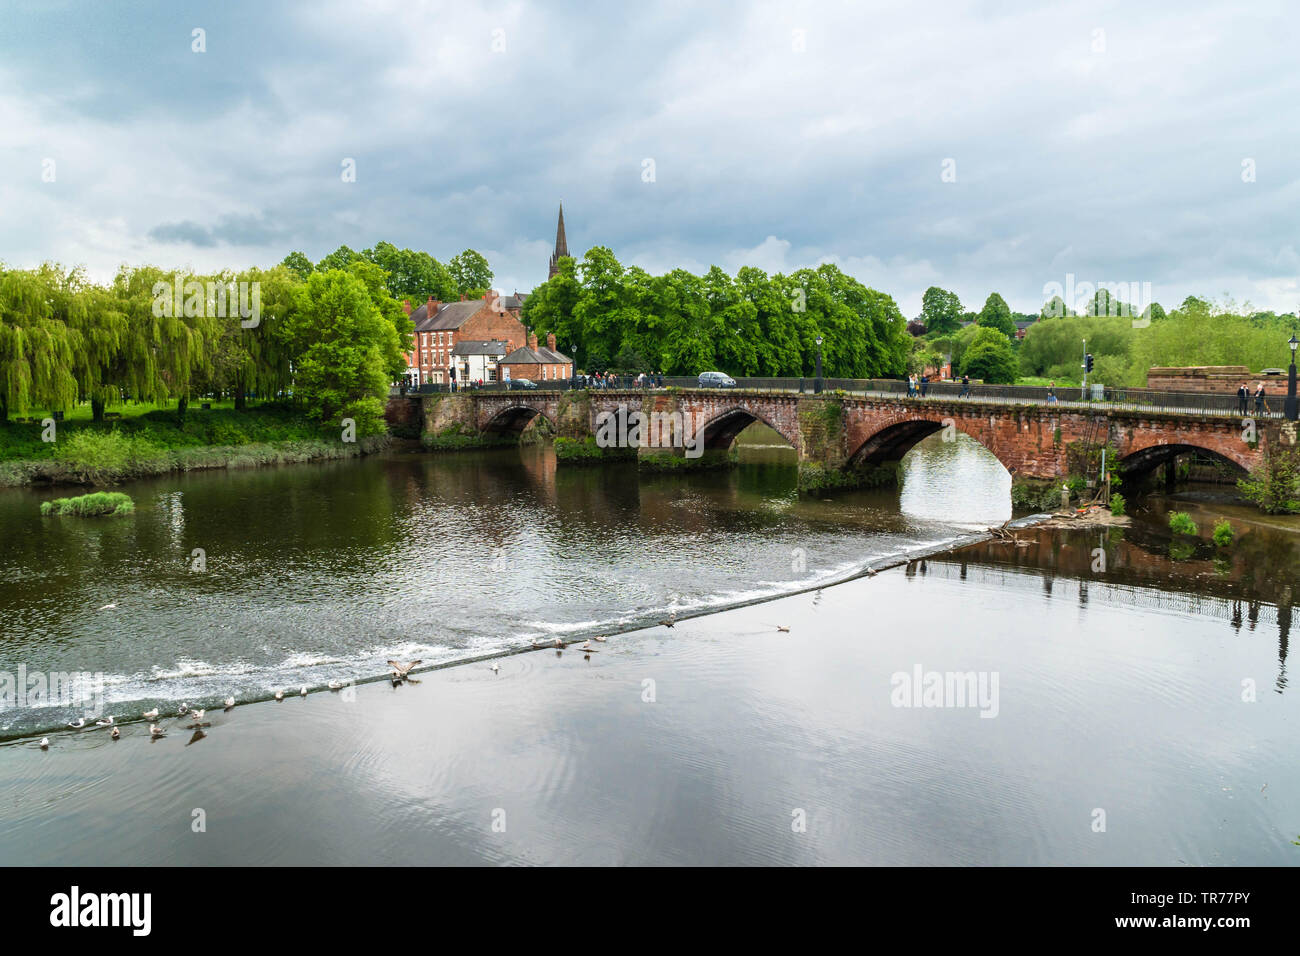 Originally built by the Romans the Old Dee bridge spans the river Dee at Chester England UK. May 2019 Stock Photo